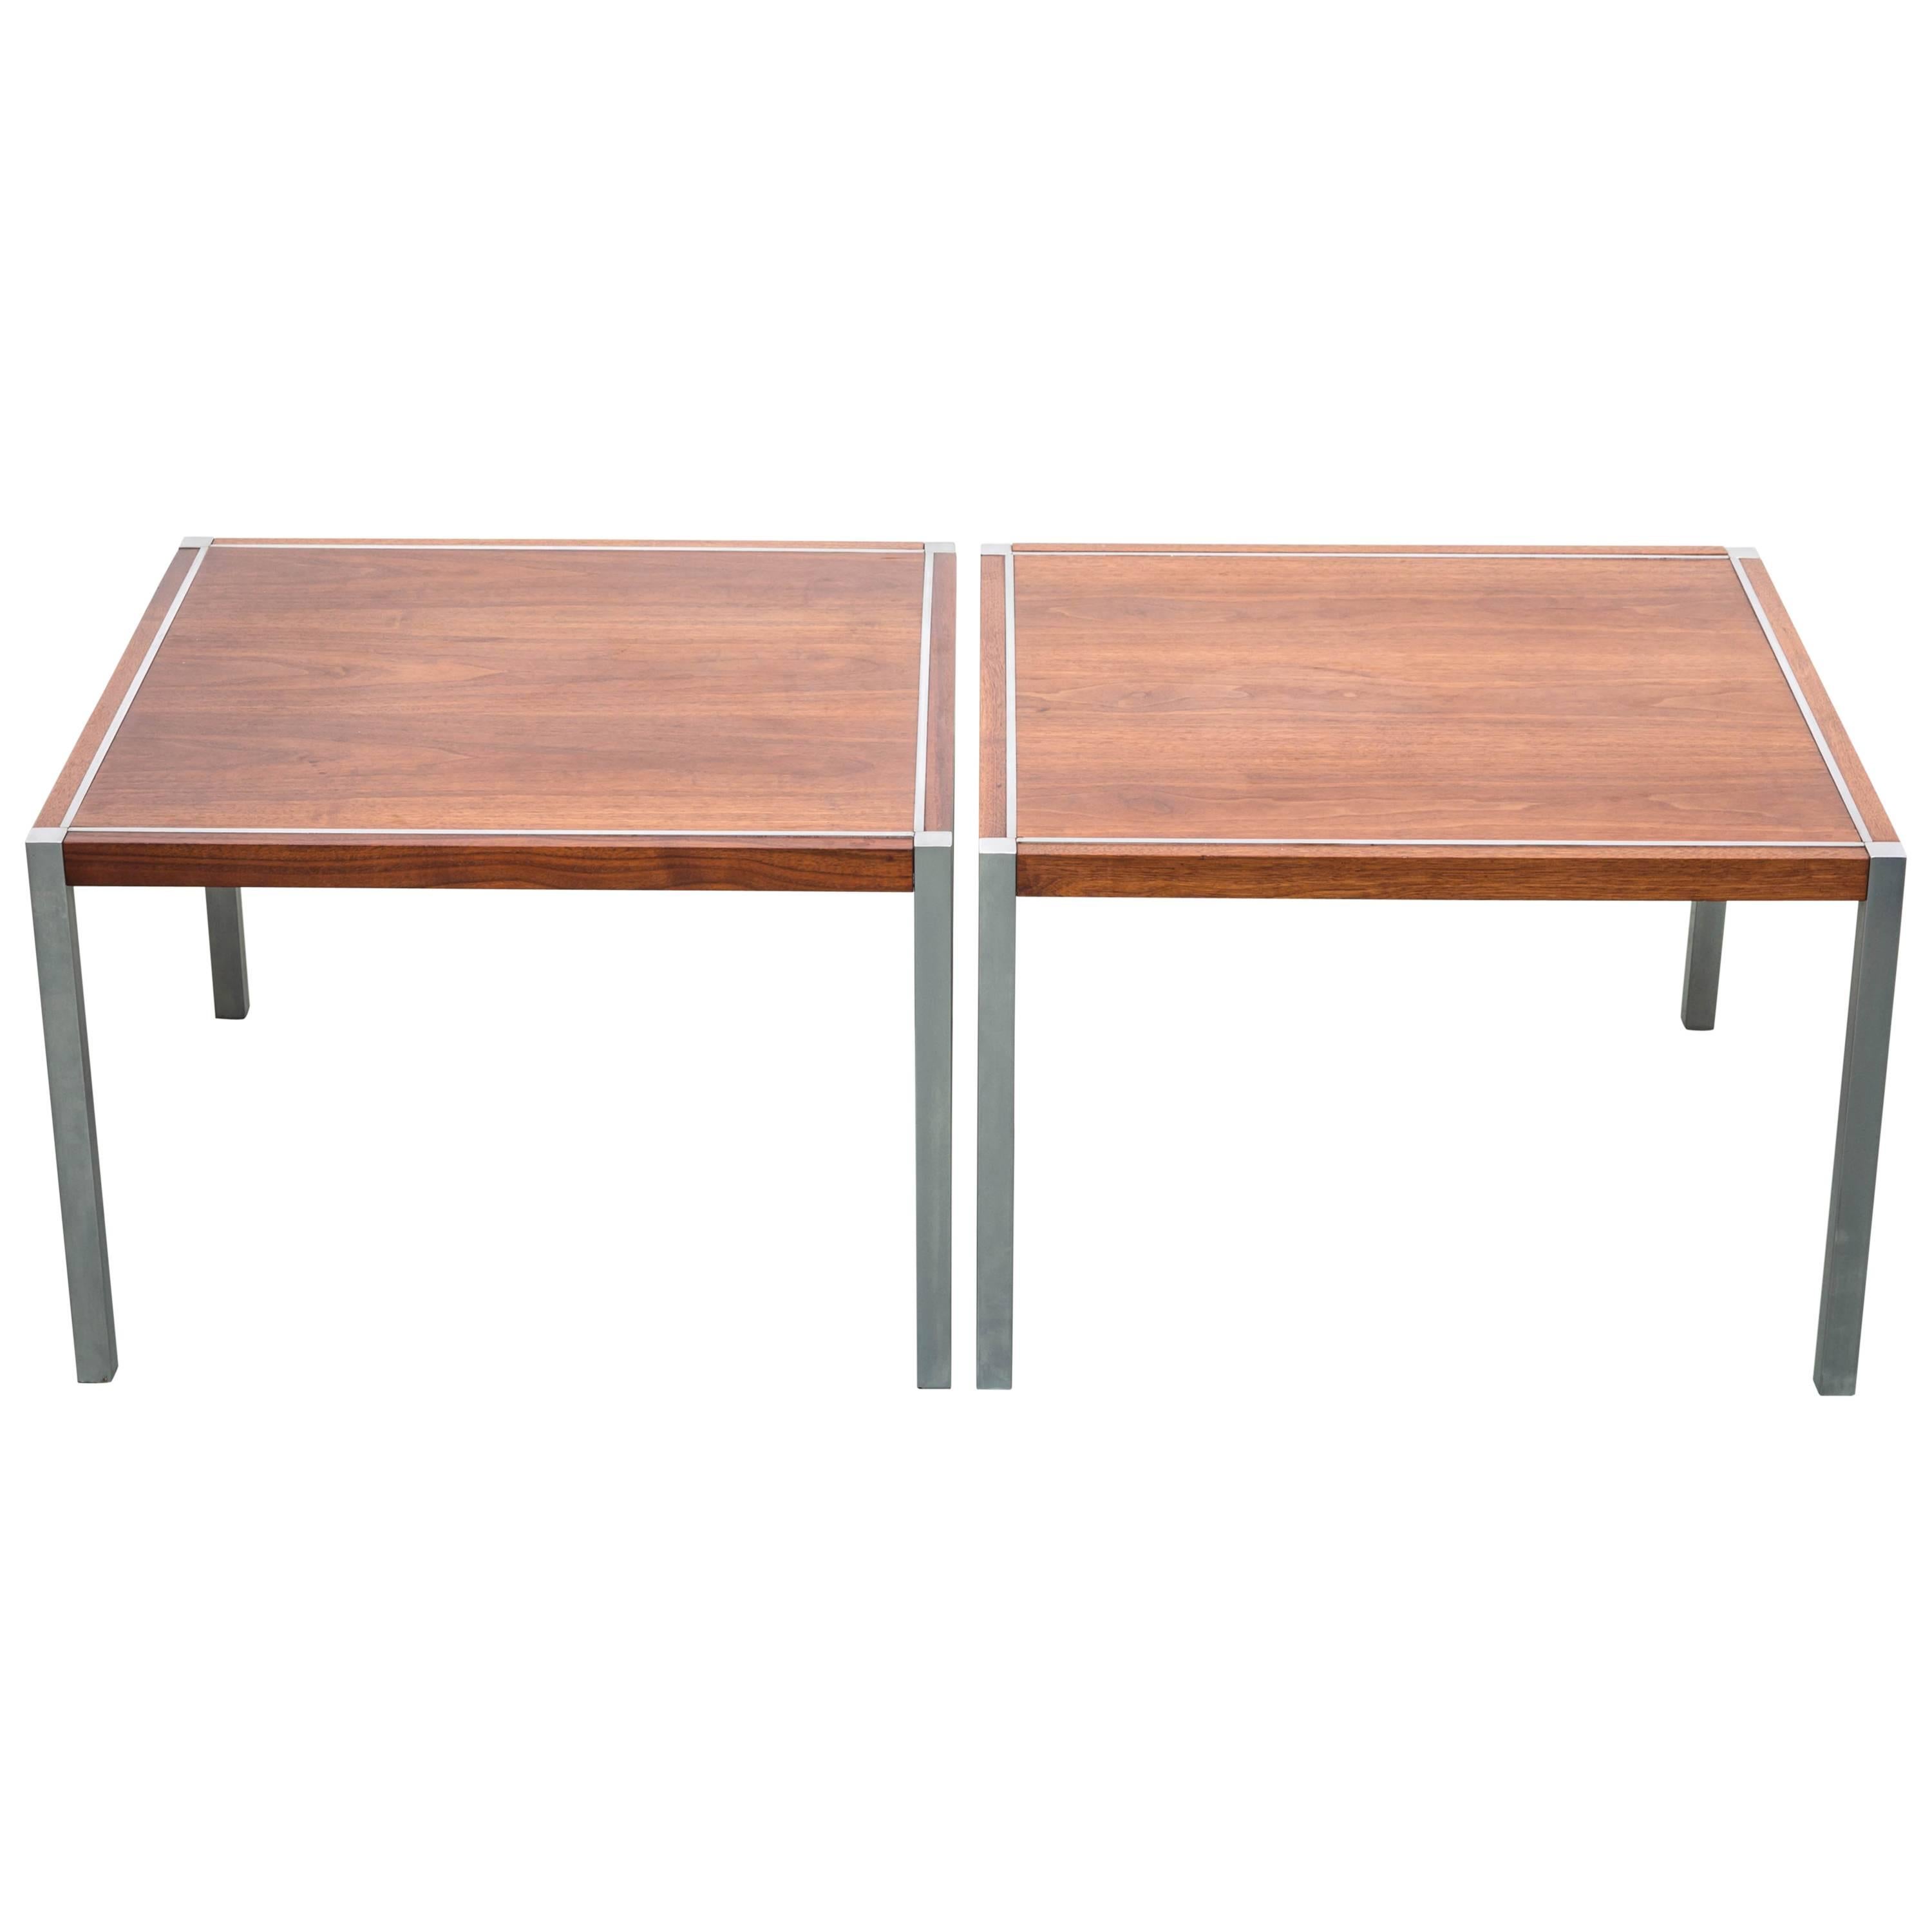 Pair of Walnut Side Tables by Richard Schultz for Knoll